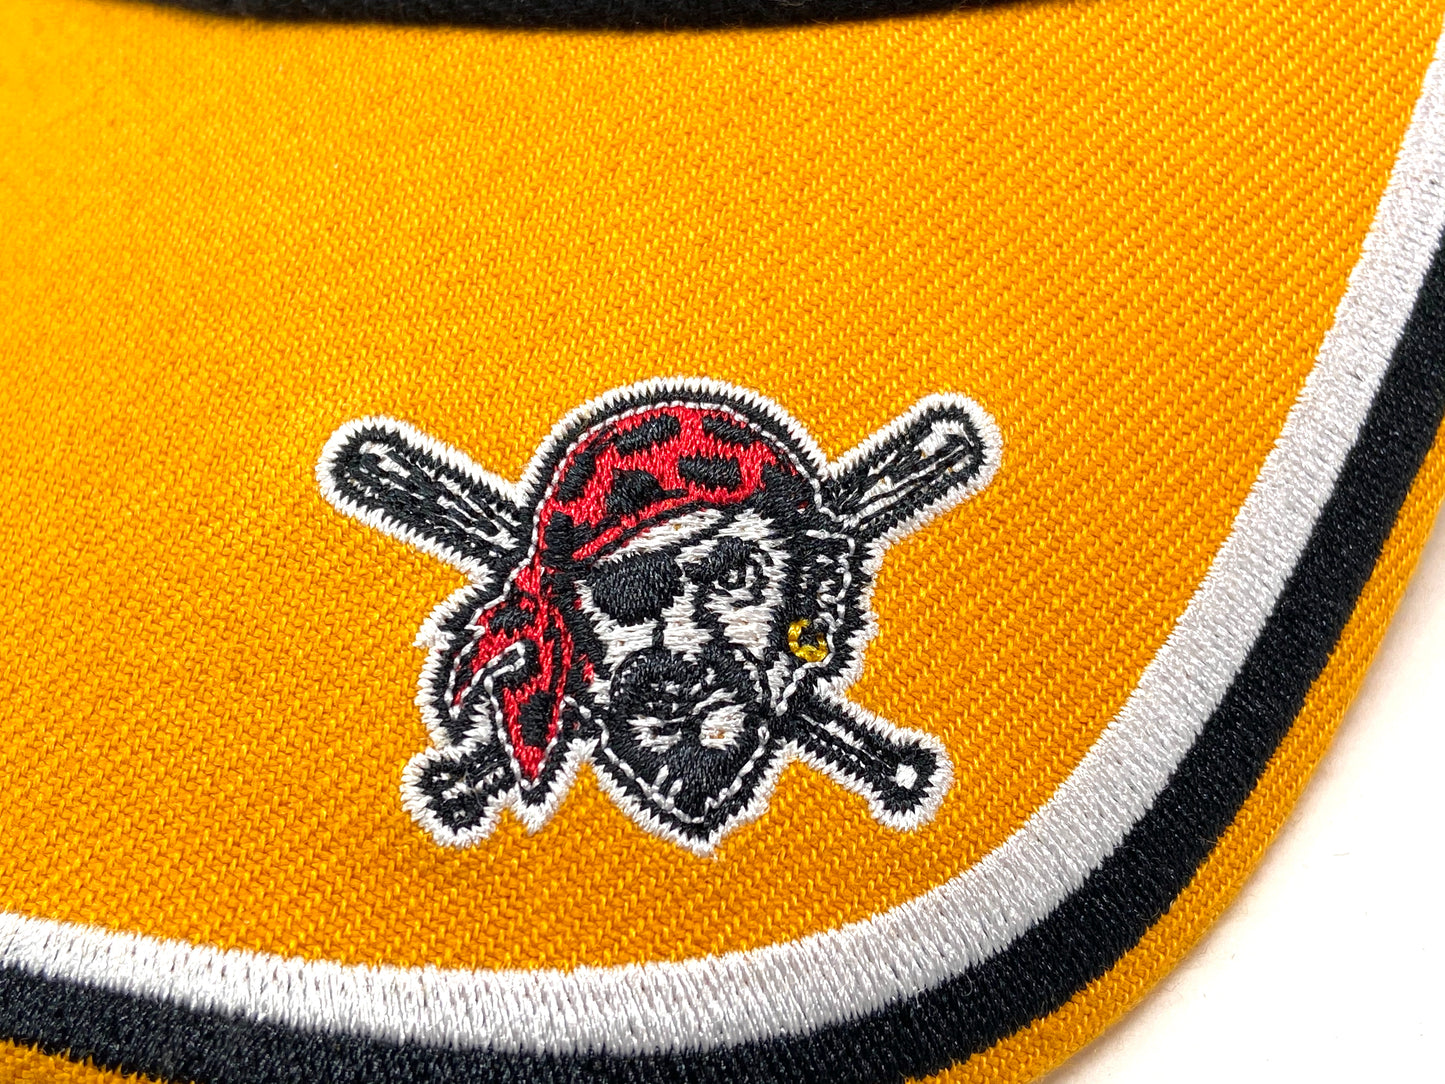 Pittsburgh Pirates Vintage MLB "Replay" 15% Wool Ball Hat by Twins Enterprise